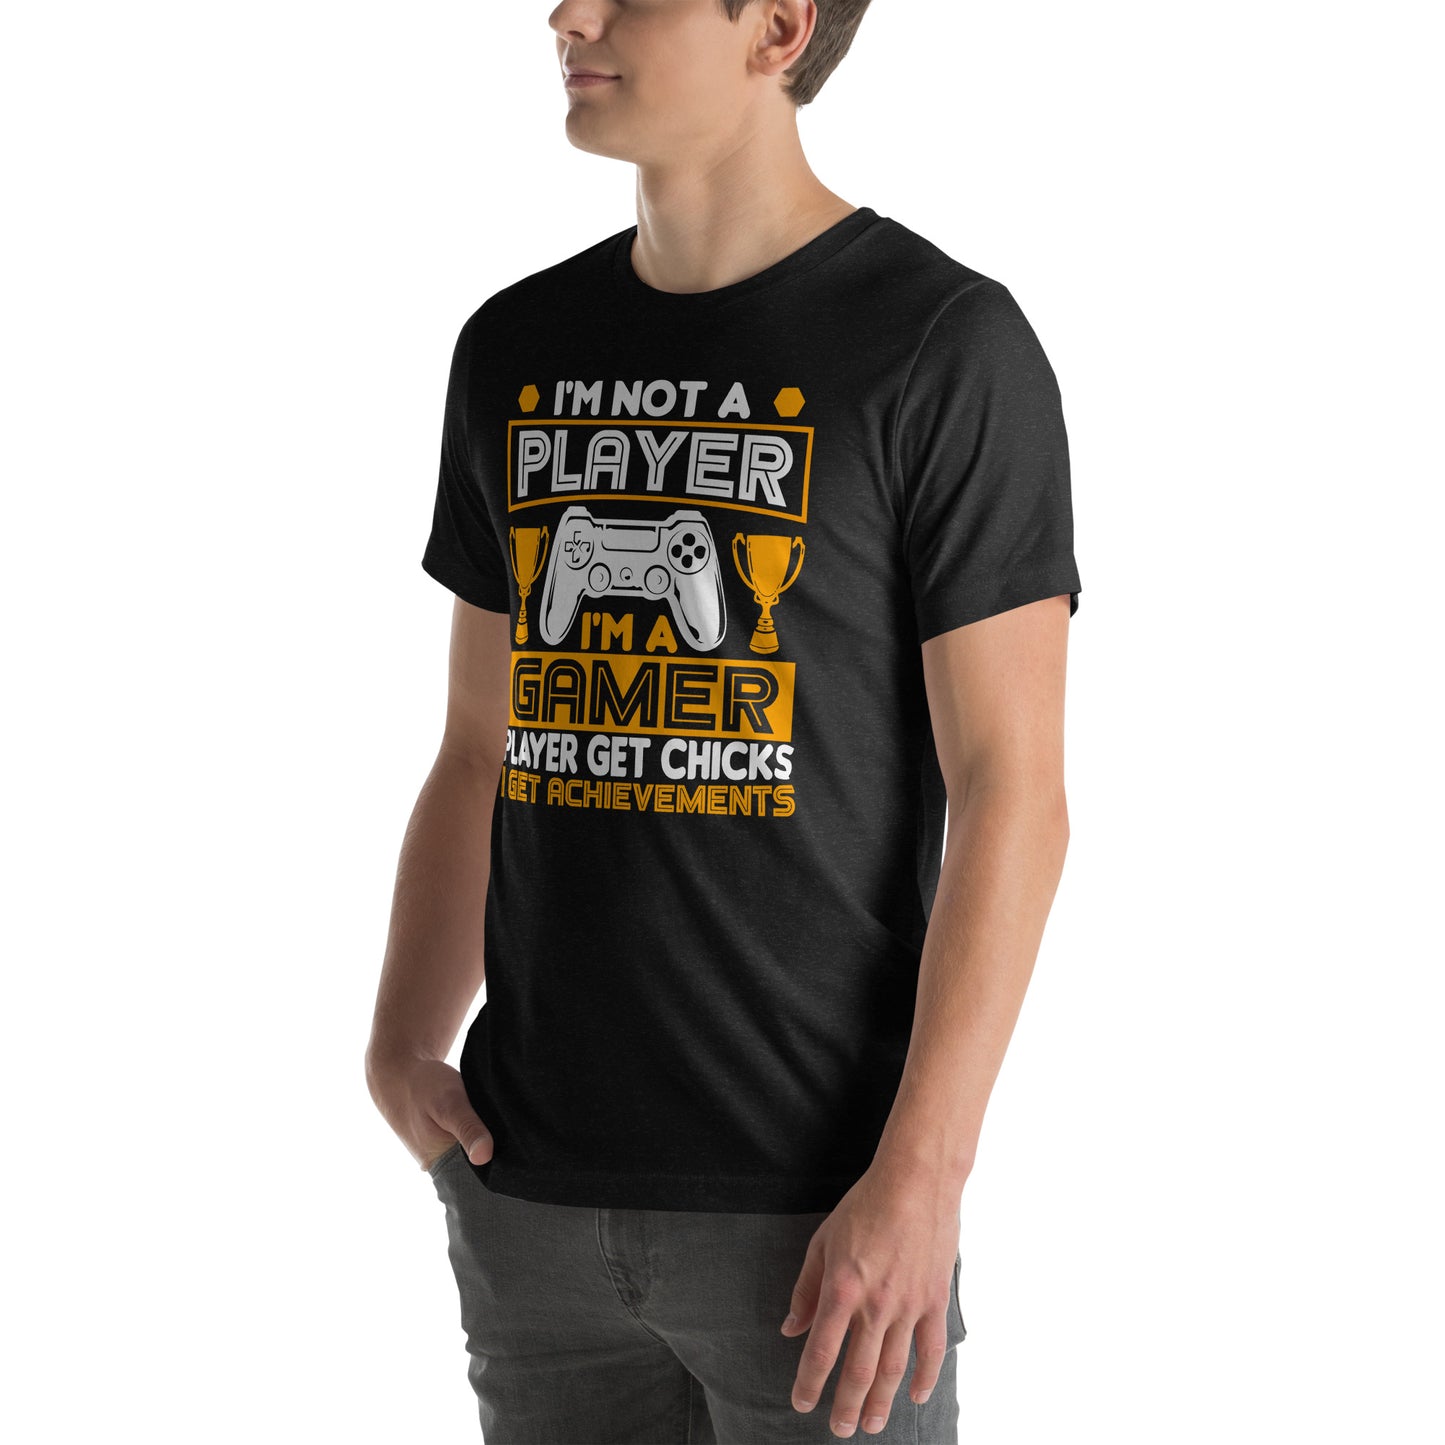 I'm Not a Player, I'm a Gamer | Unisex Casual Tee | Funny Gamer Shirt